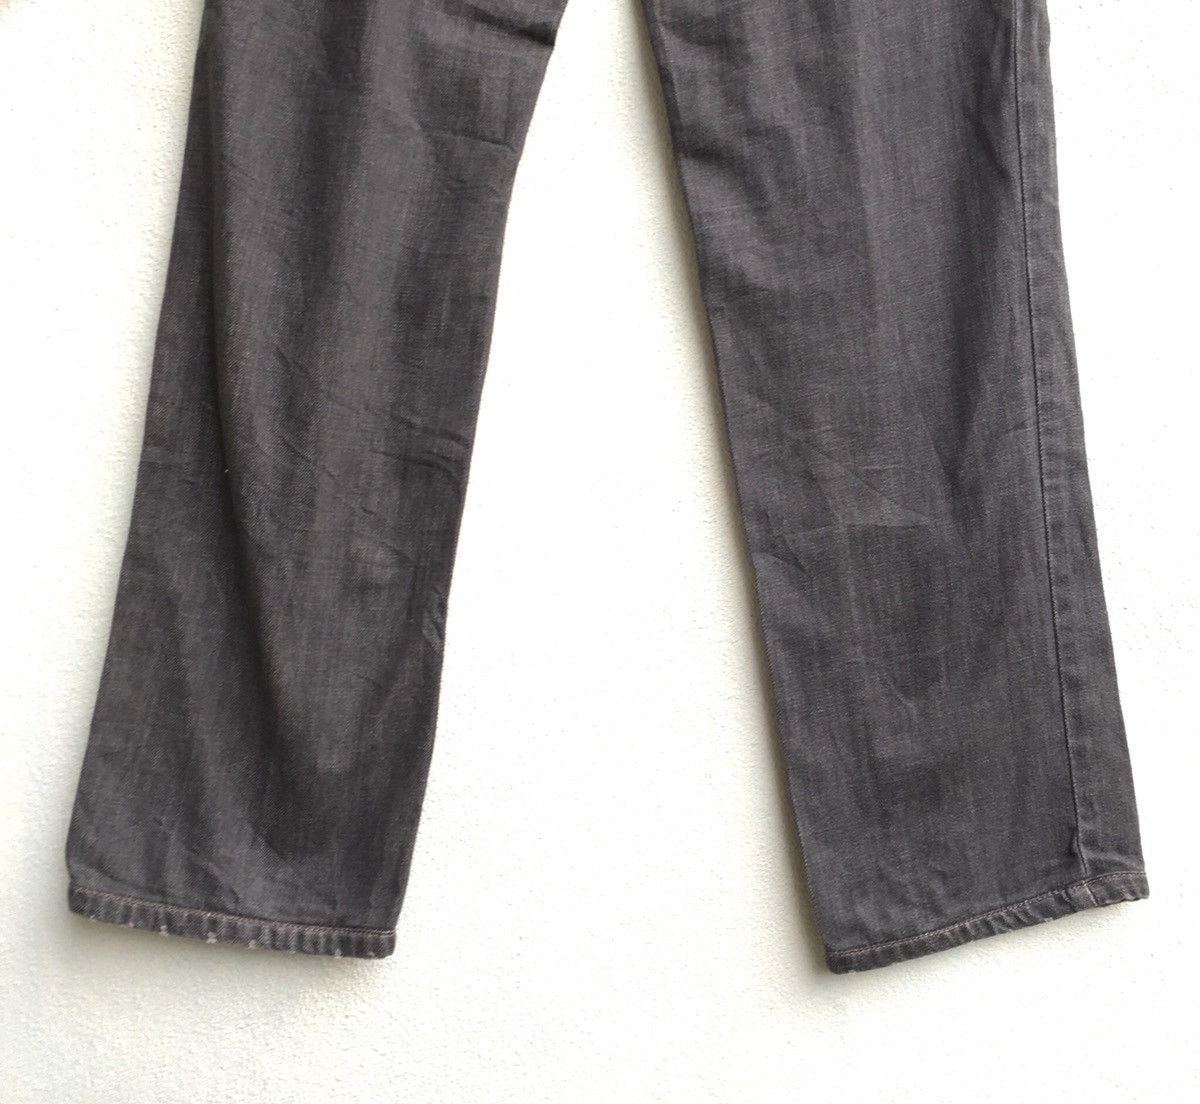 D&G FW05/06 Distressed Jeans - 5